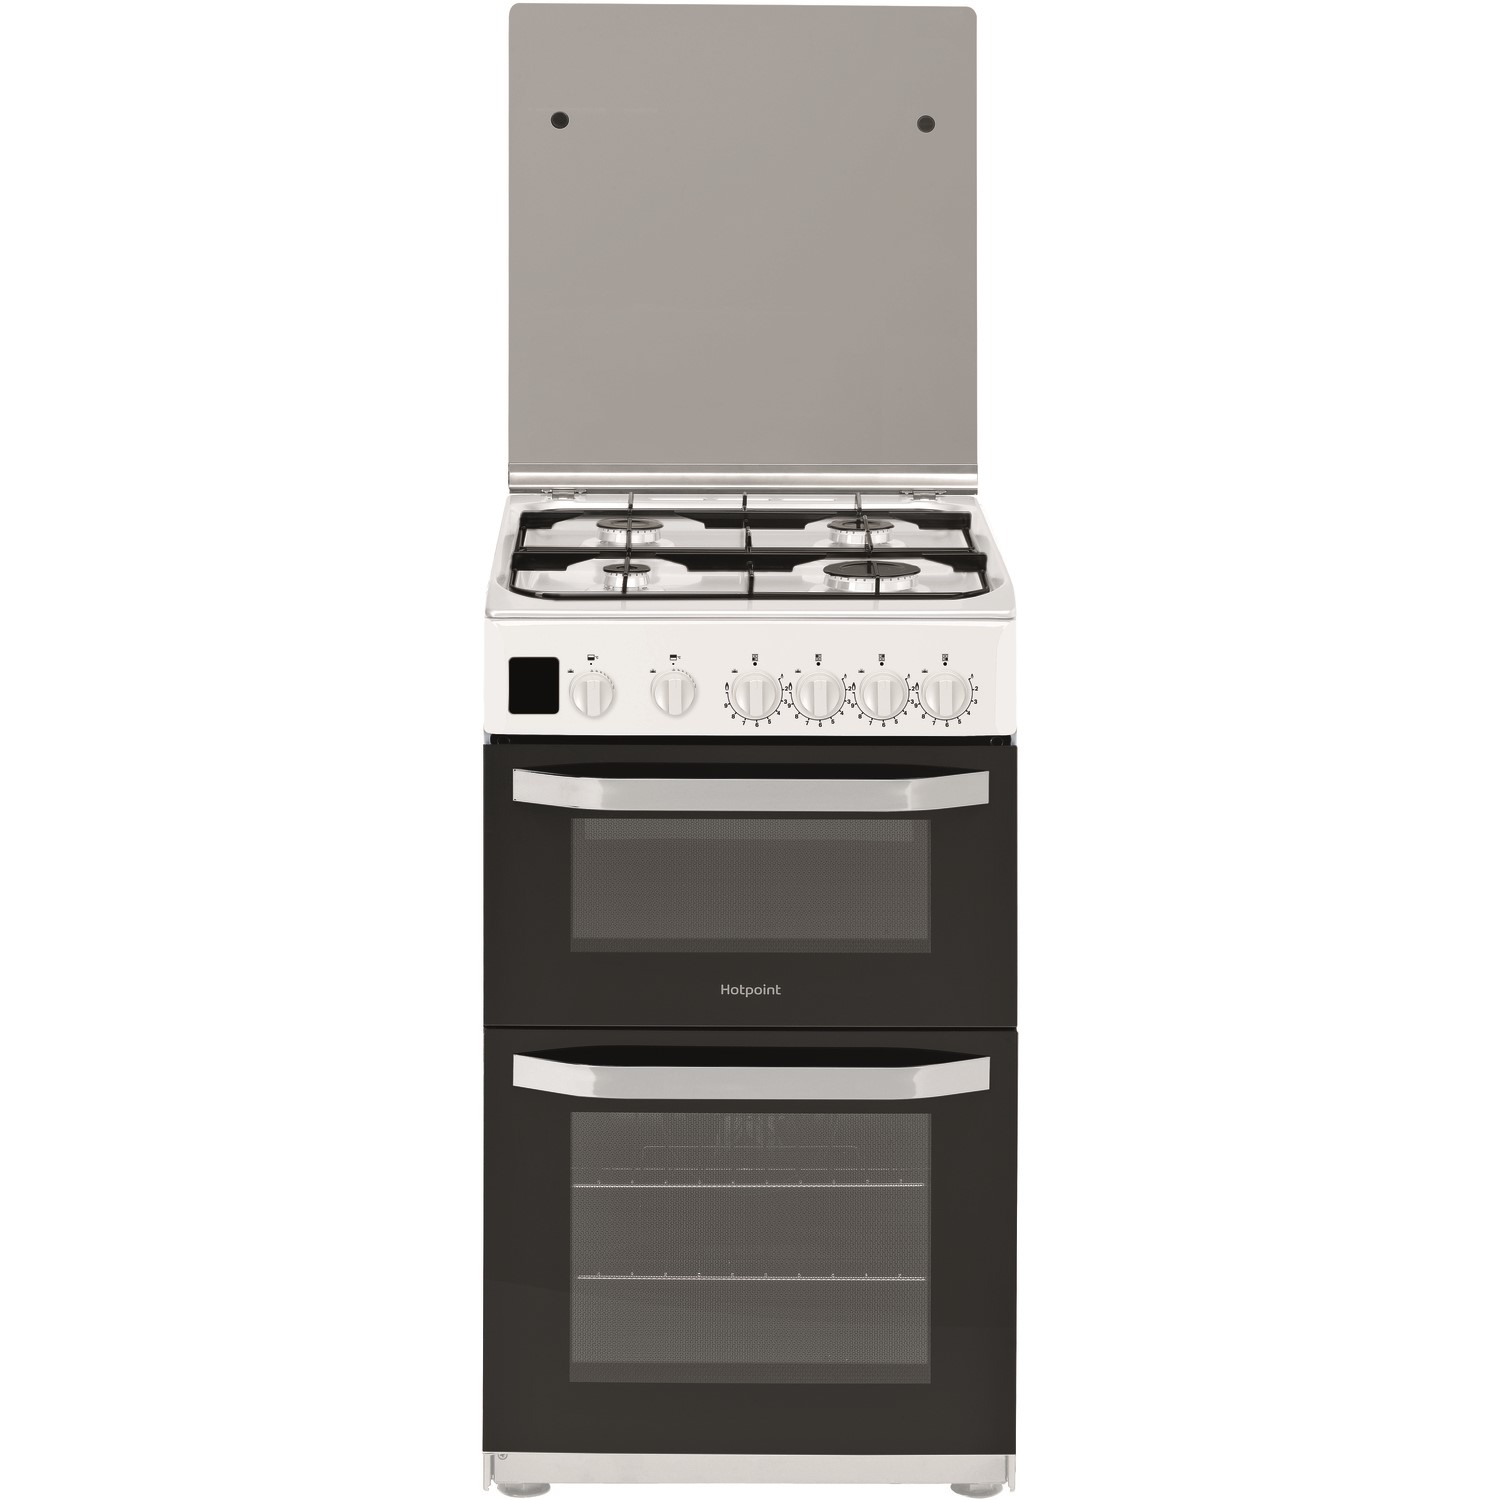 Hotpoint HD5G00CCW/UK Gas Cooker with Full Width Gas Grill - White - A+/A Rated